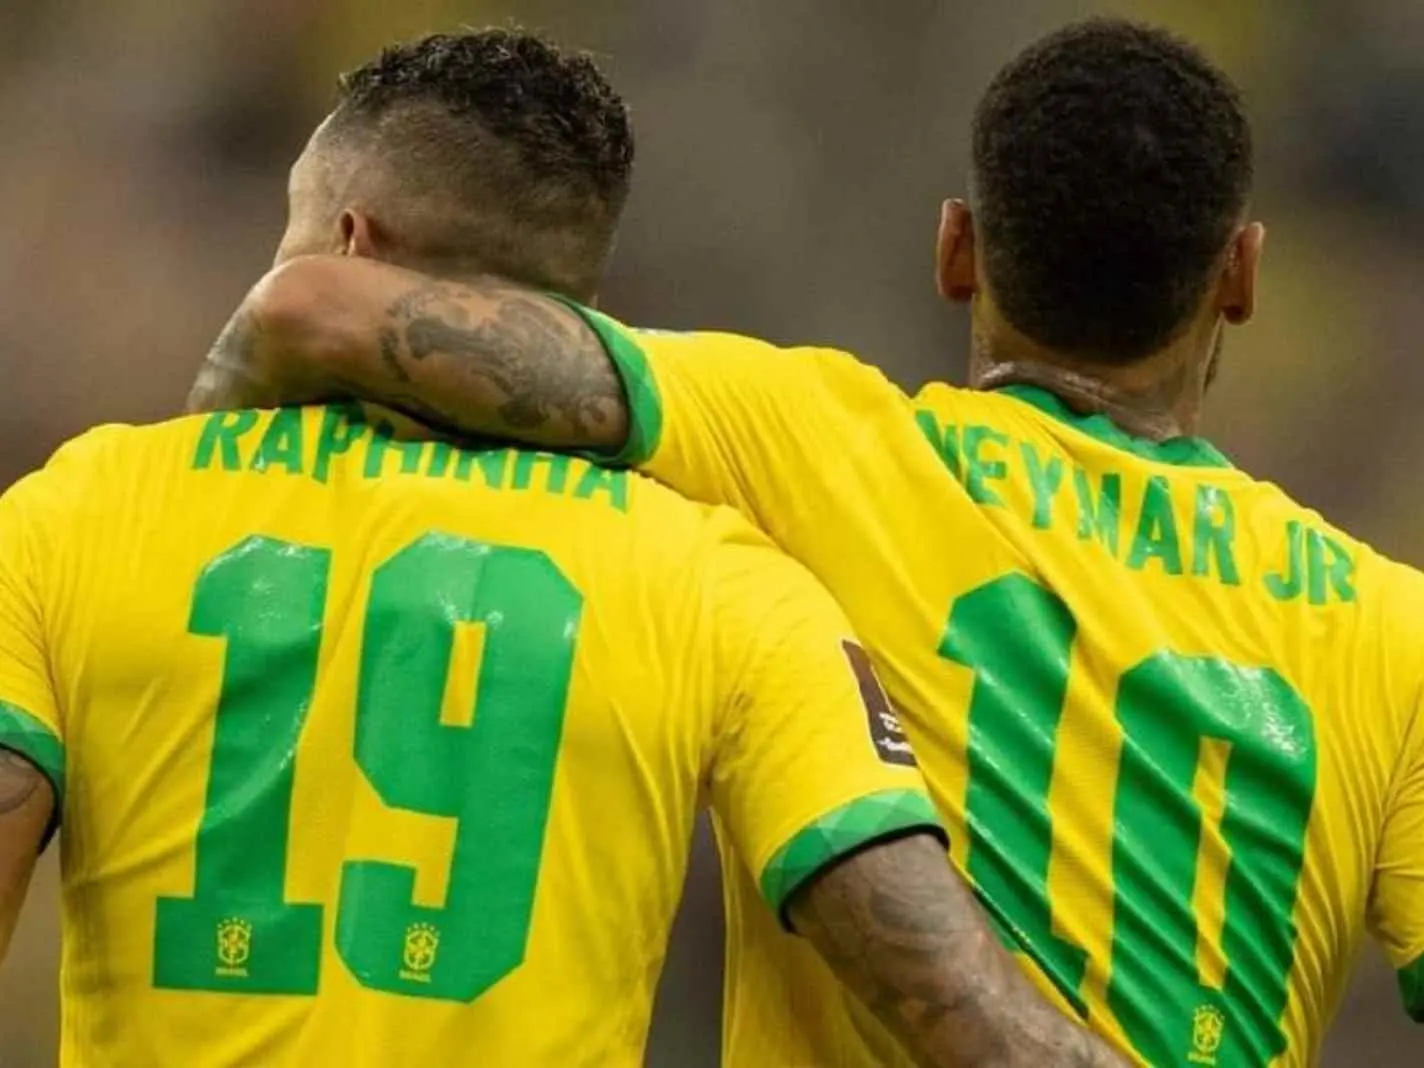 The photo shows Neymar with his left hand wrapped around Raphinha's neck during a Brazil match.